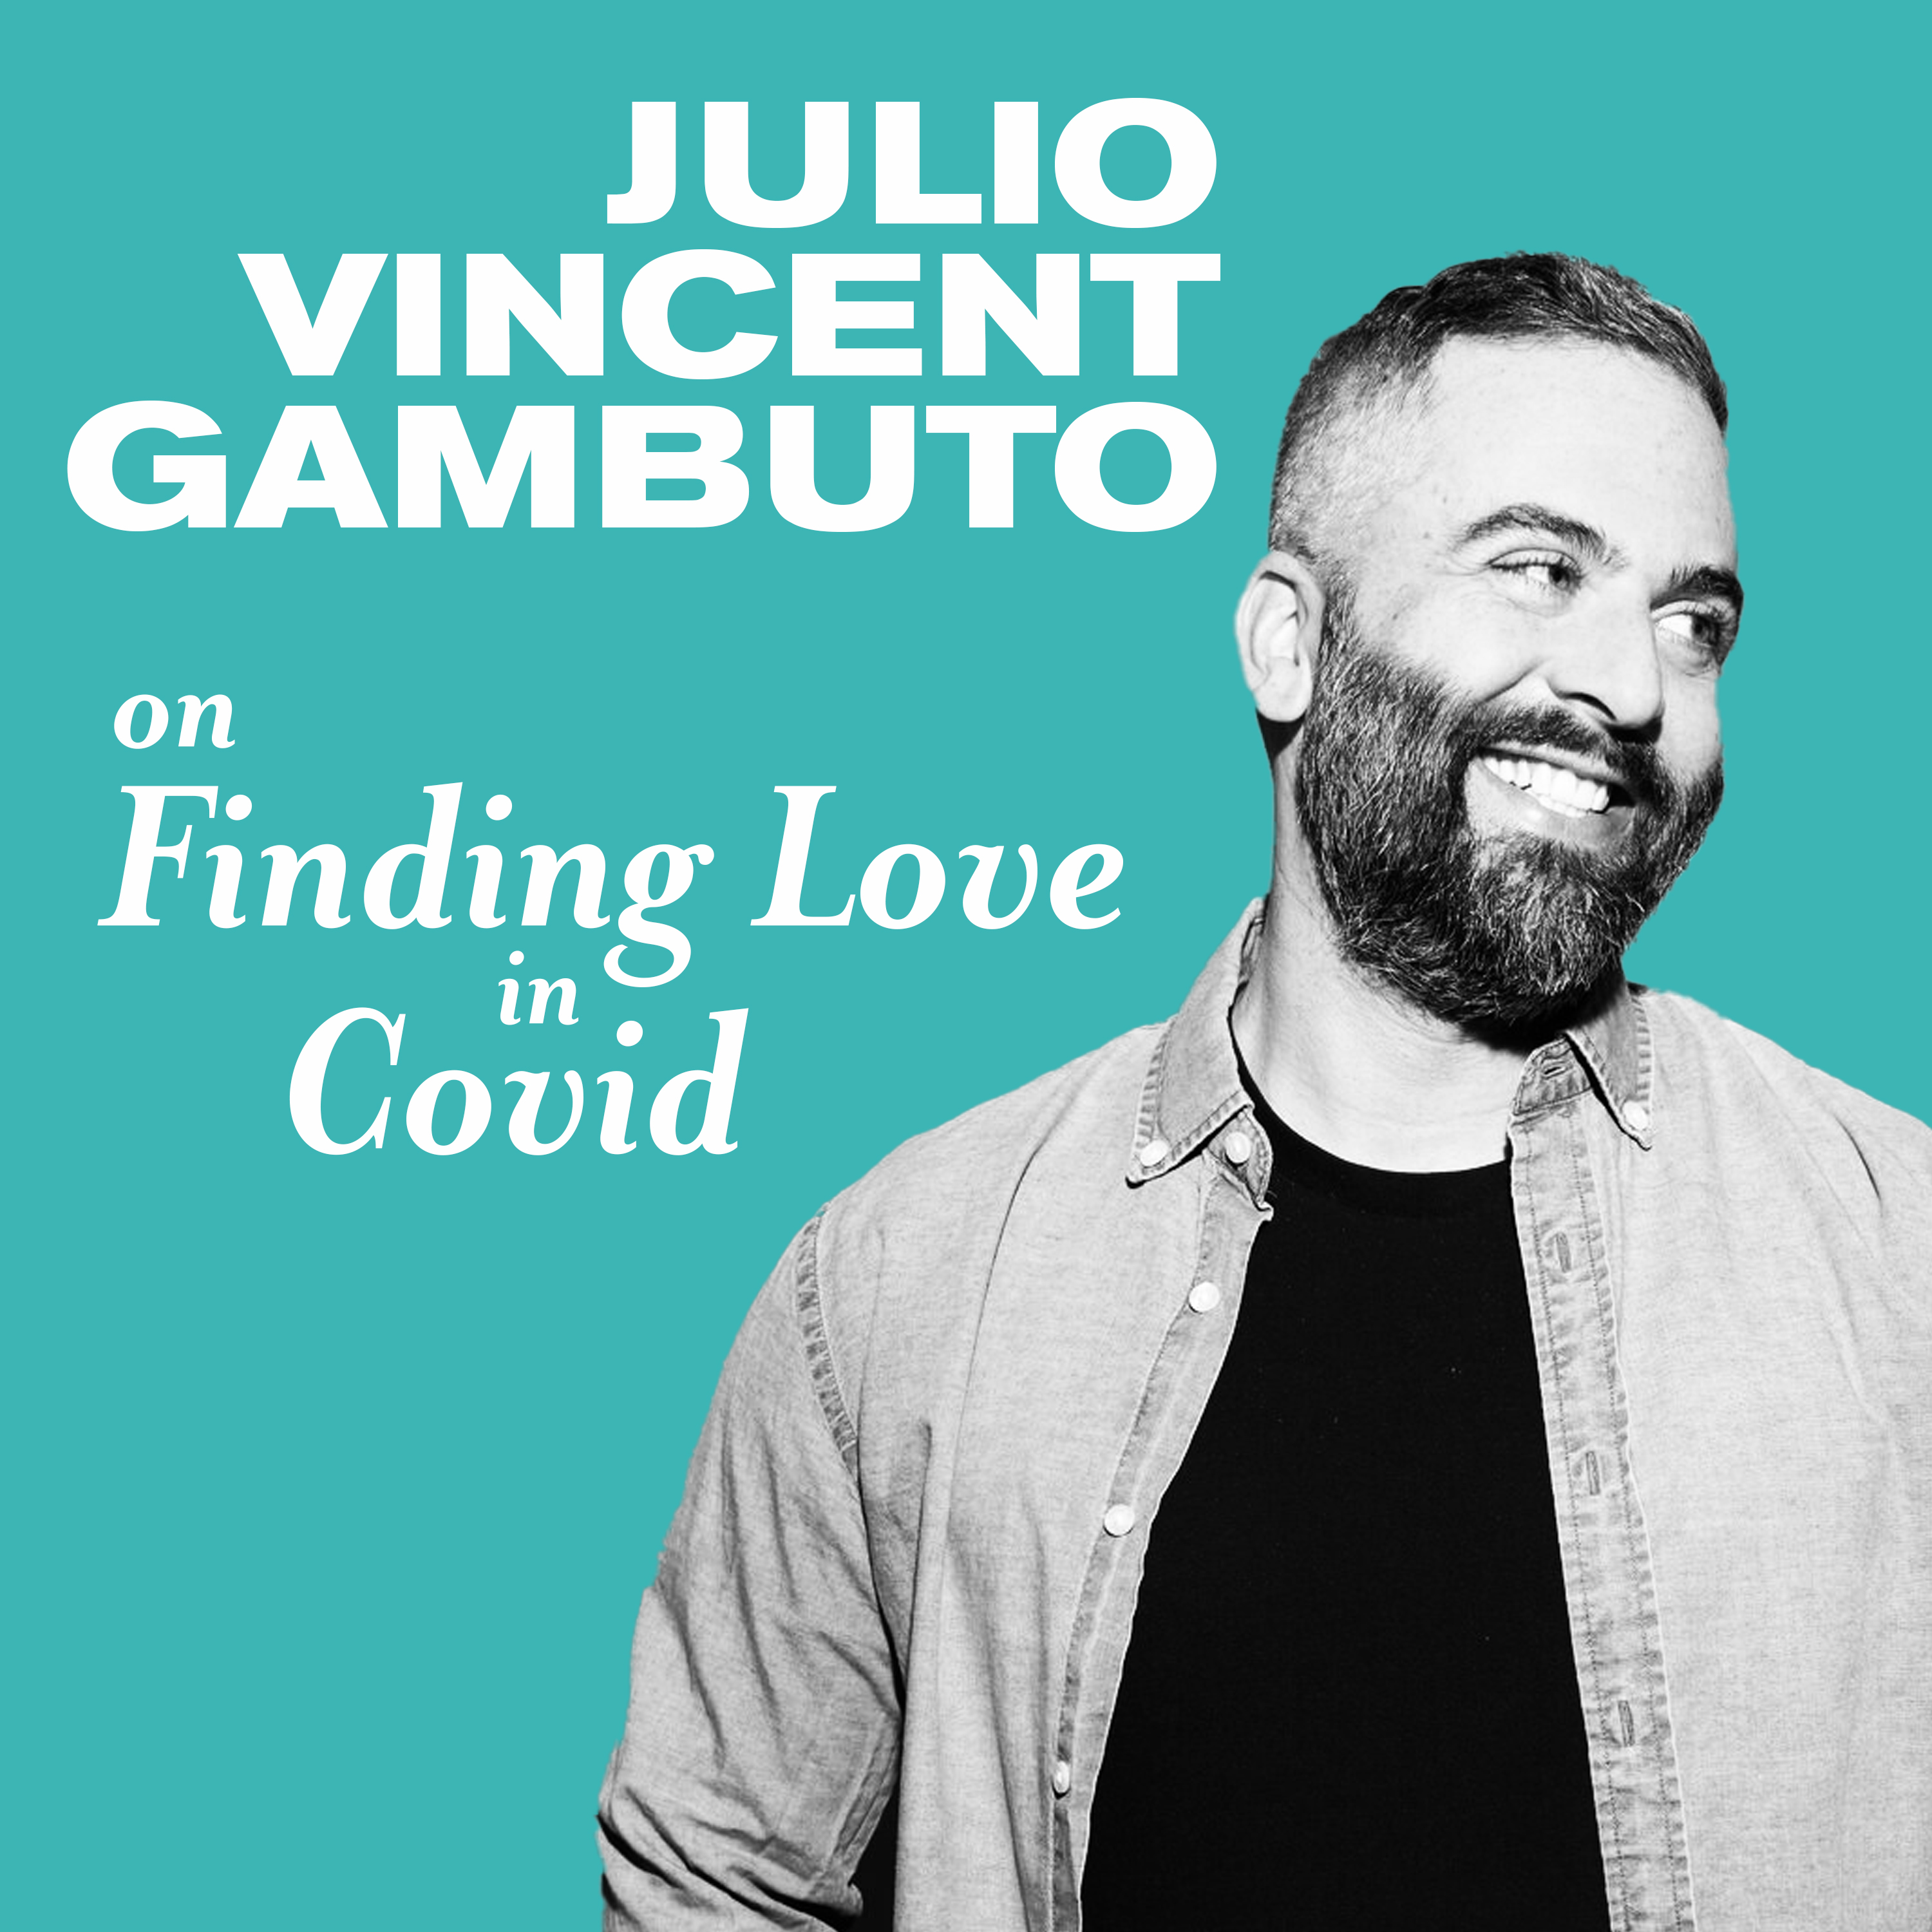 Julio Vincent Gambuto on Finding Love in the Time of Covid